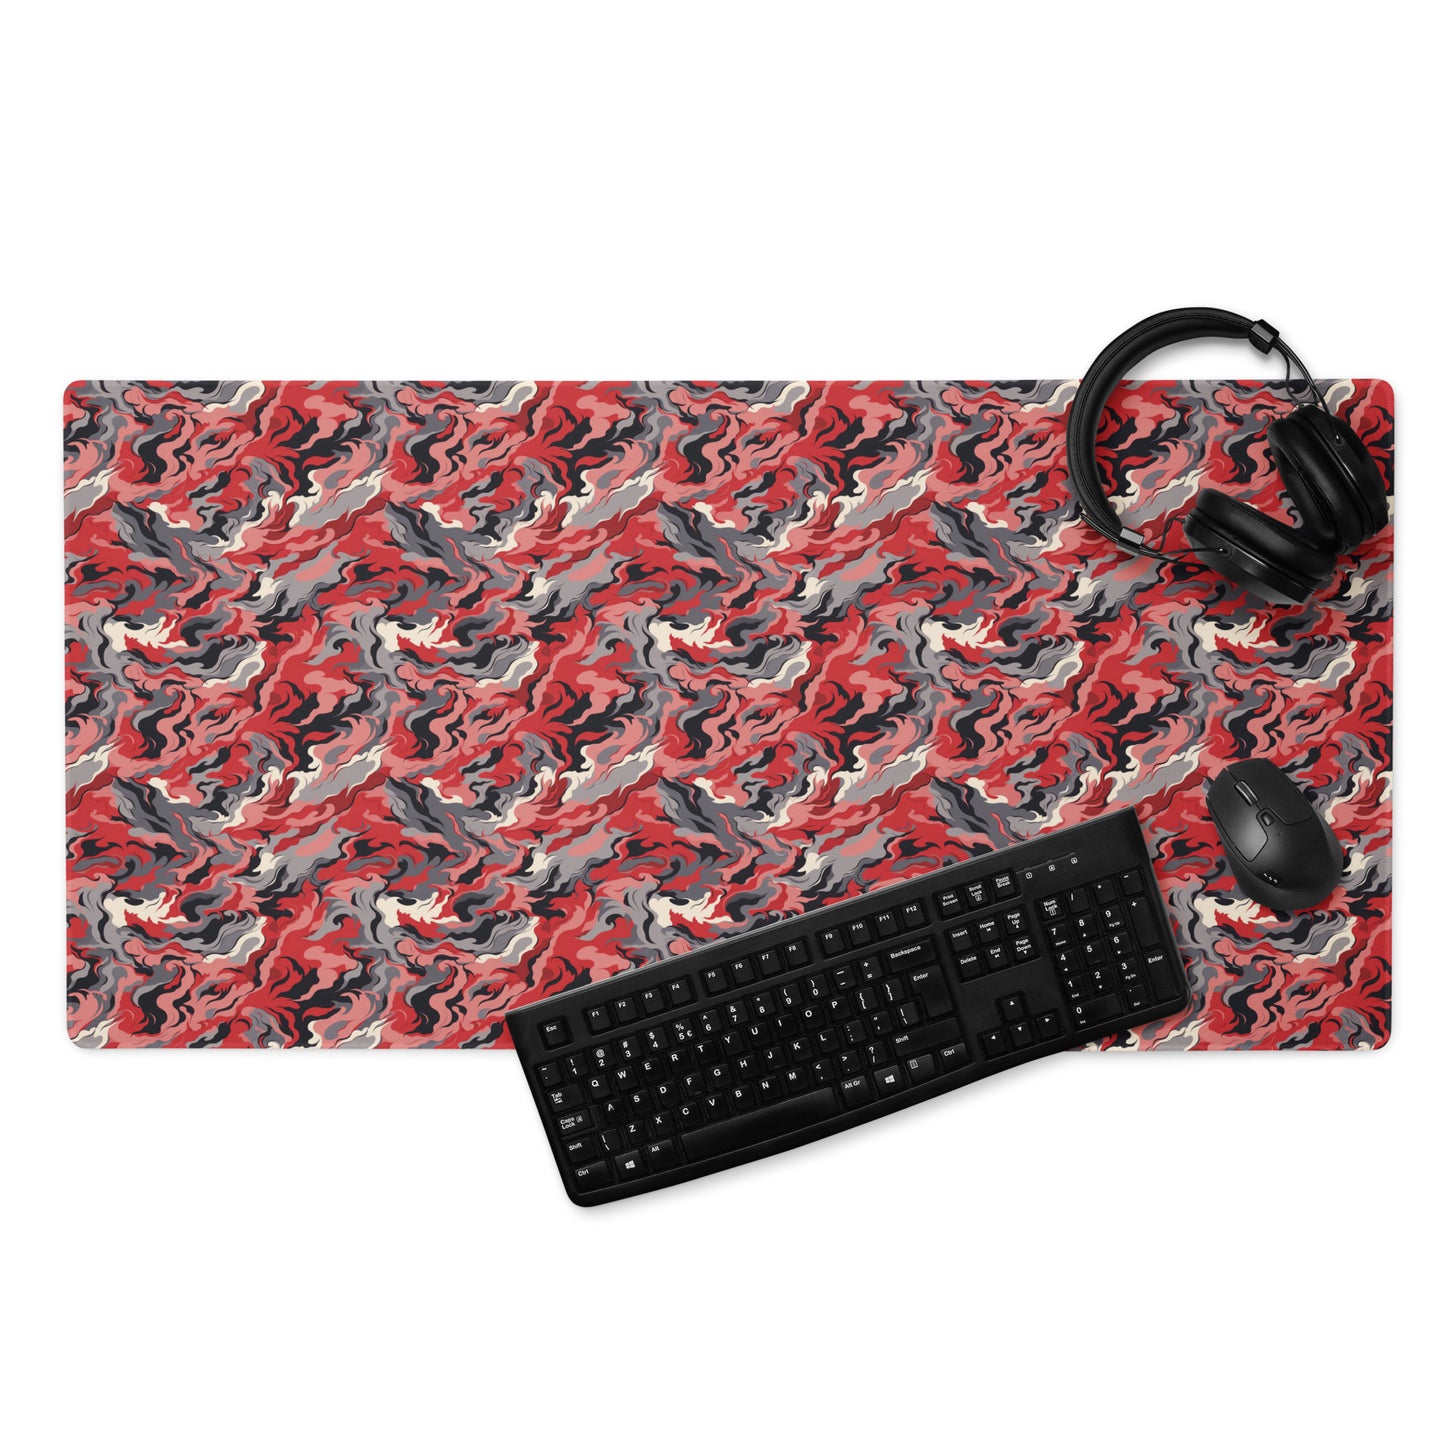 A 36" x 18" desk pad with a grey and red camo pattern. With a keyboard, mouse, and headphones sitting on it.